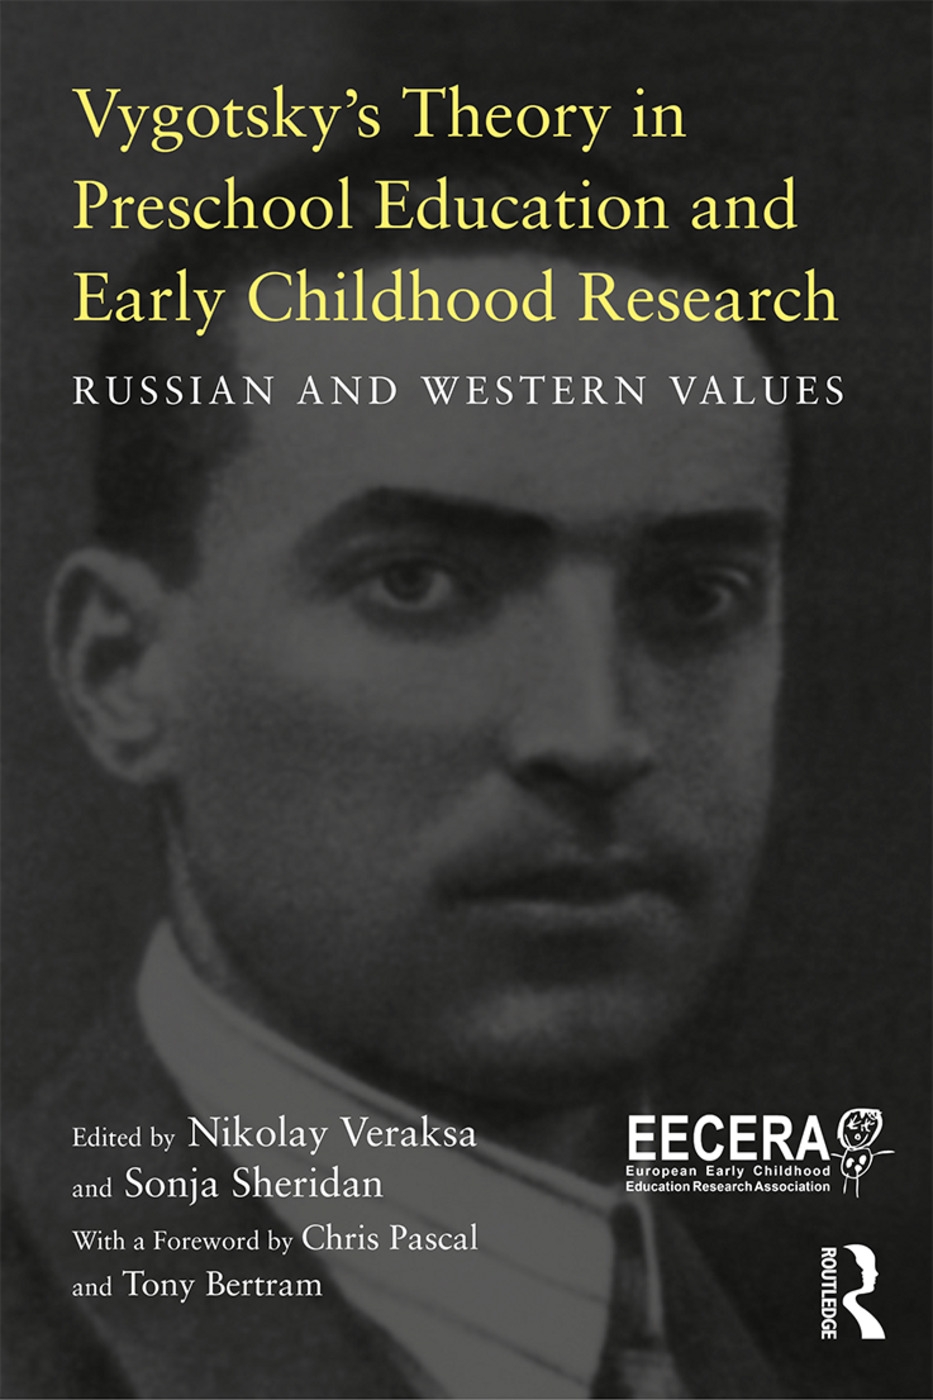 Vygotsky’s Theory in Early Childhood Education and Research: Russian and Western Values